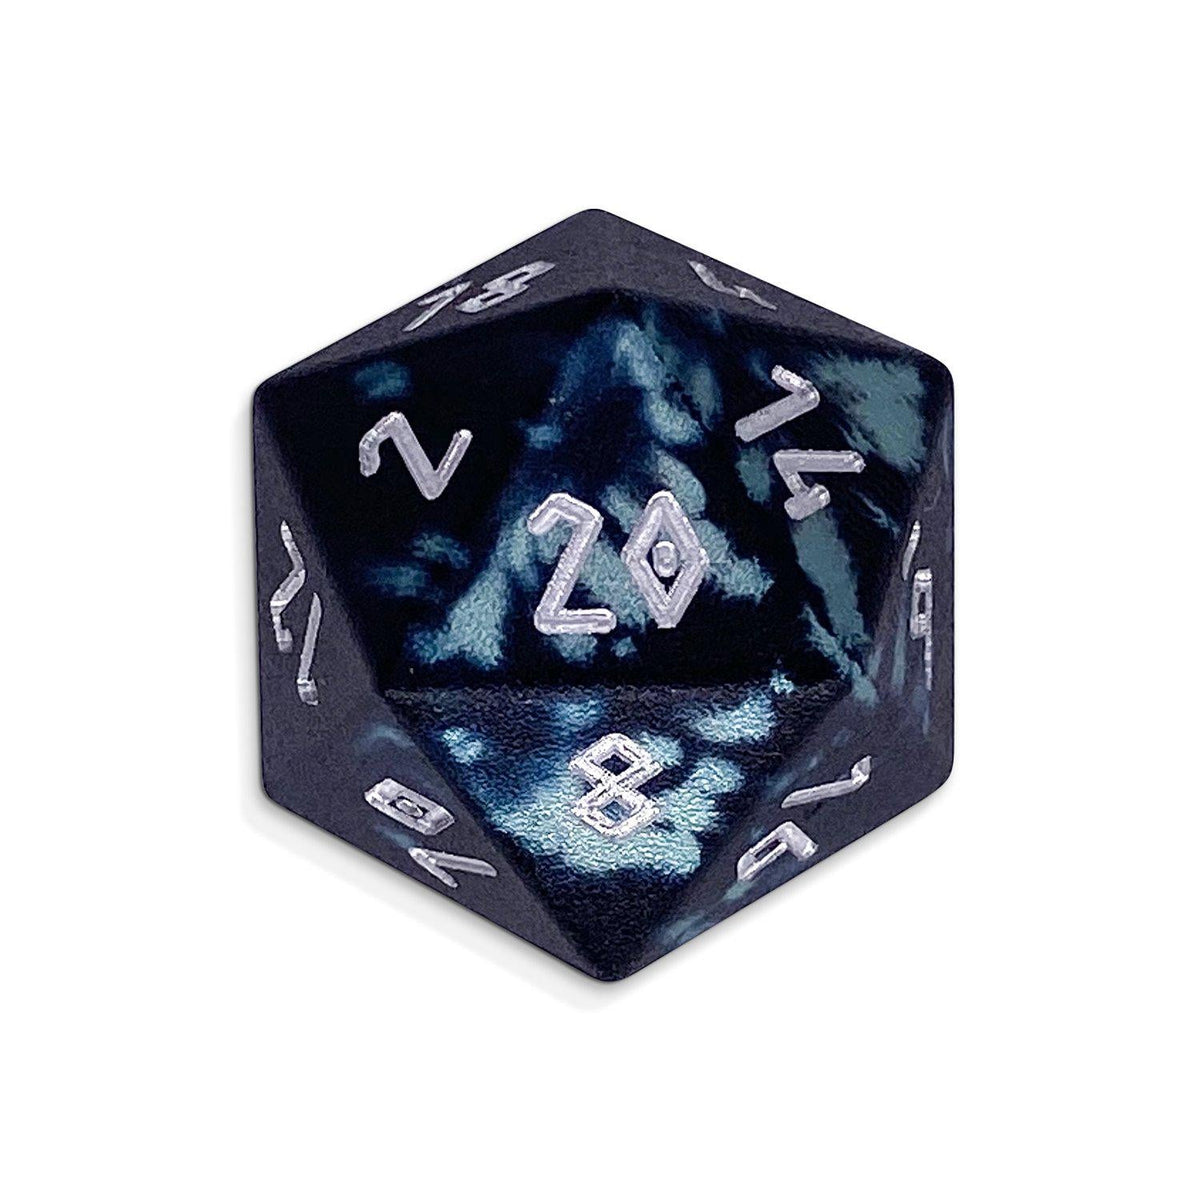 Single Wondrous Dice® D20 in Trolls Blood ™ by Norse Foundry® 6063 Aircraft Grade Aluminum - NOR 02424